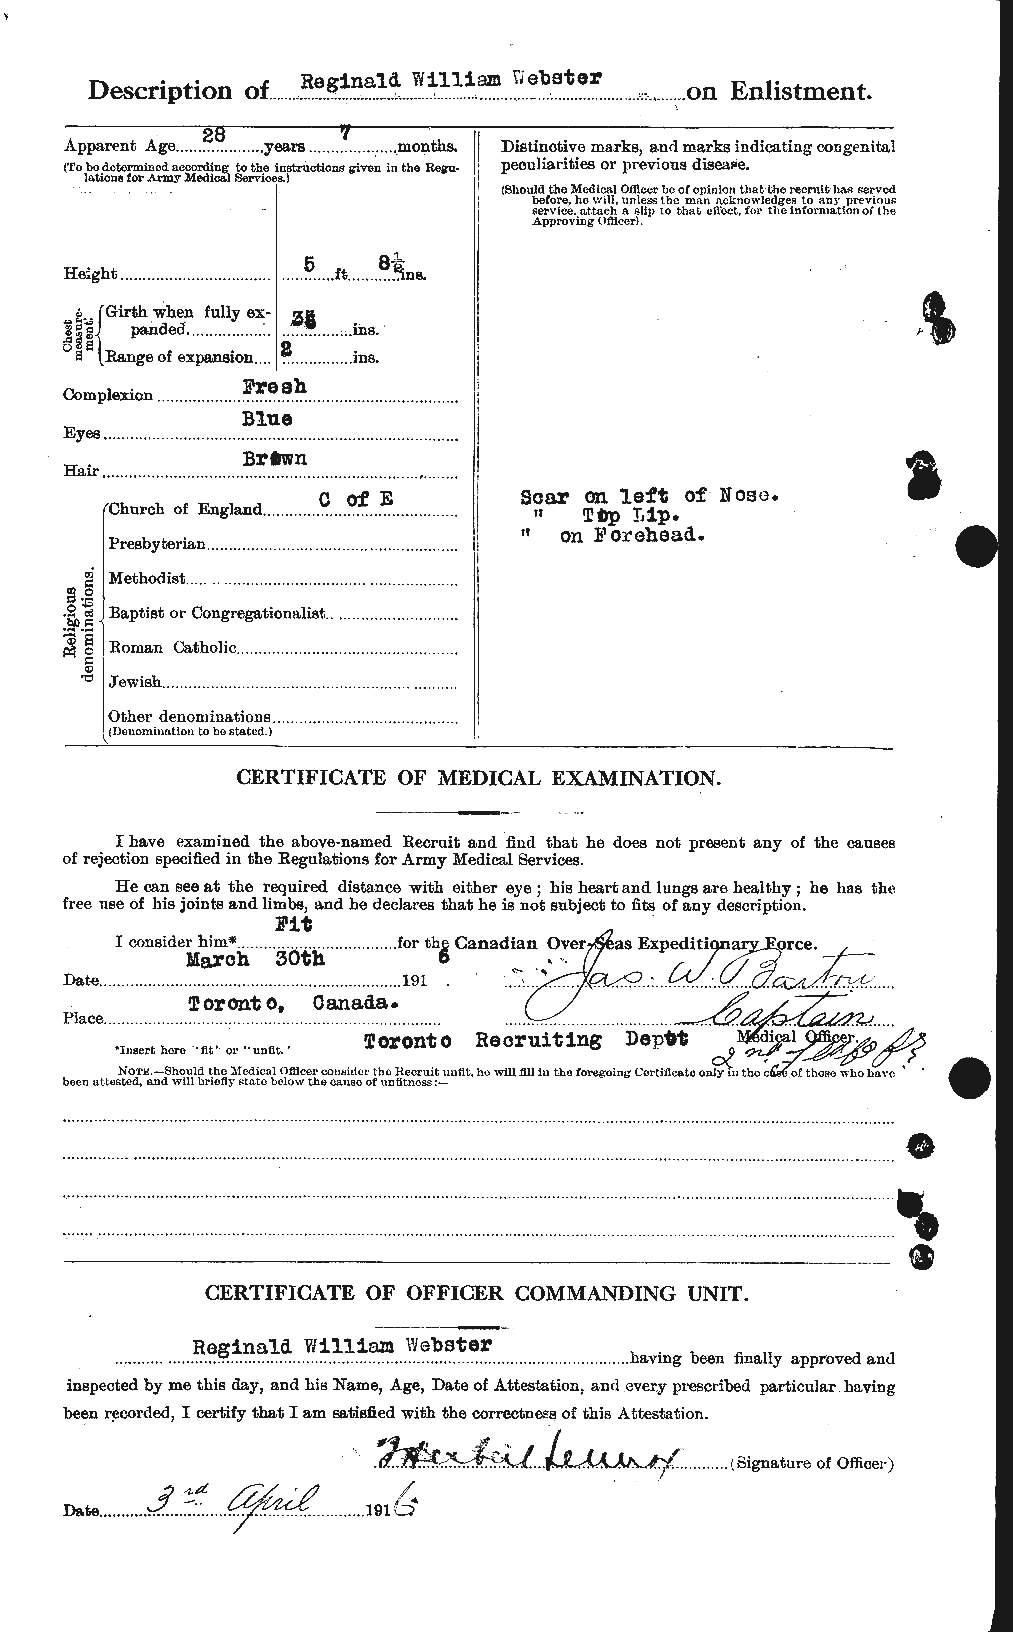 Personnel Records of the First World War - CEF 670538b